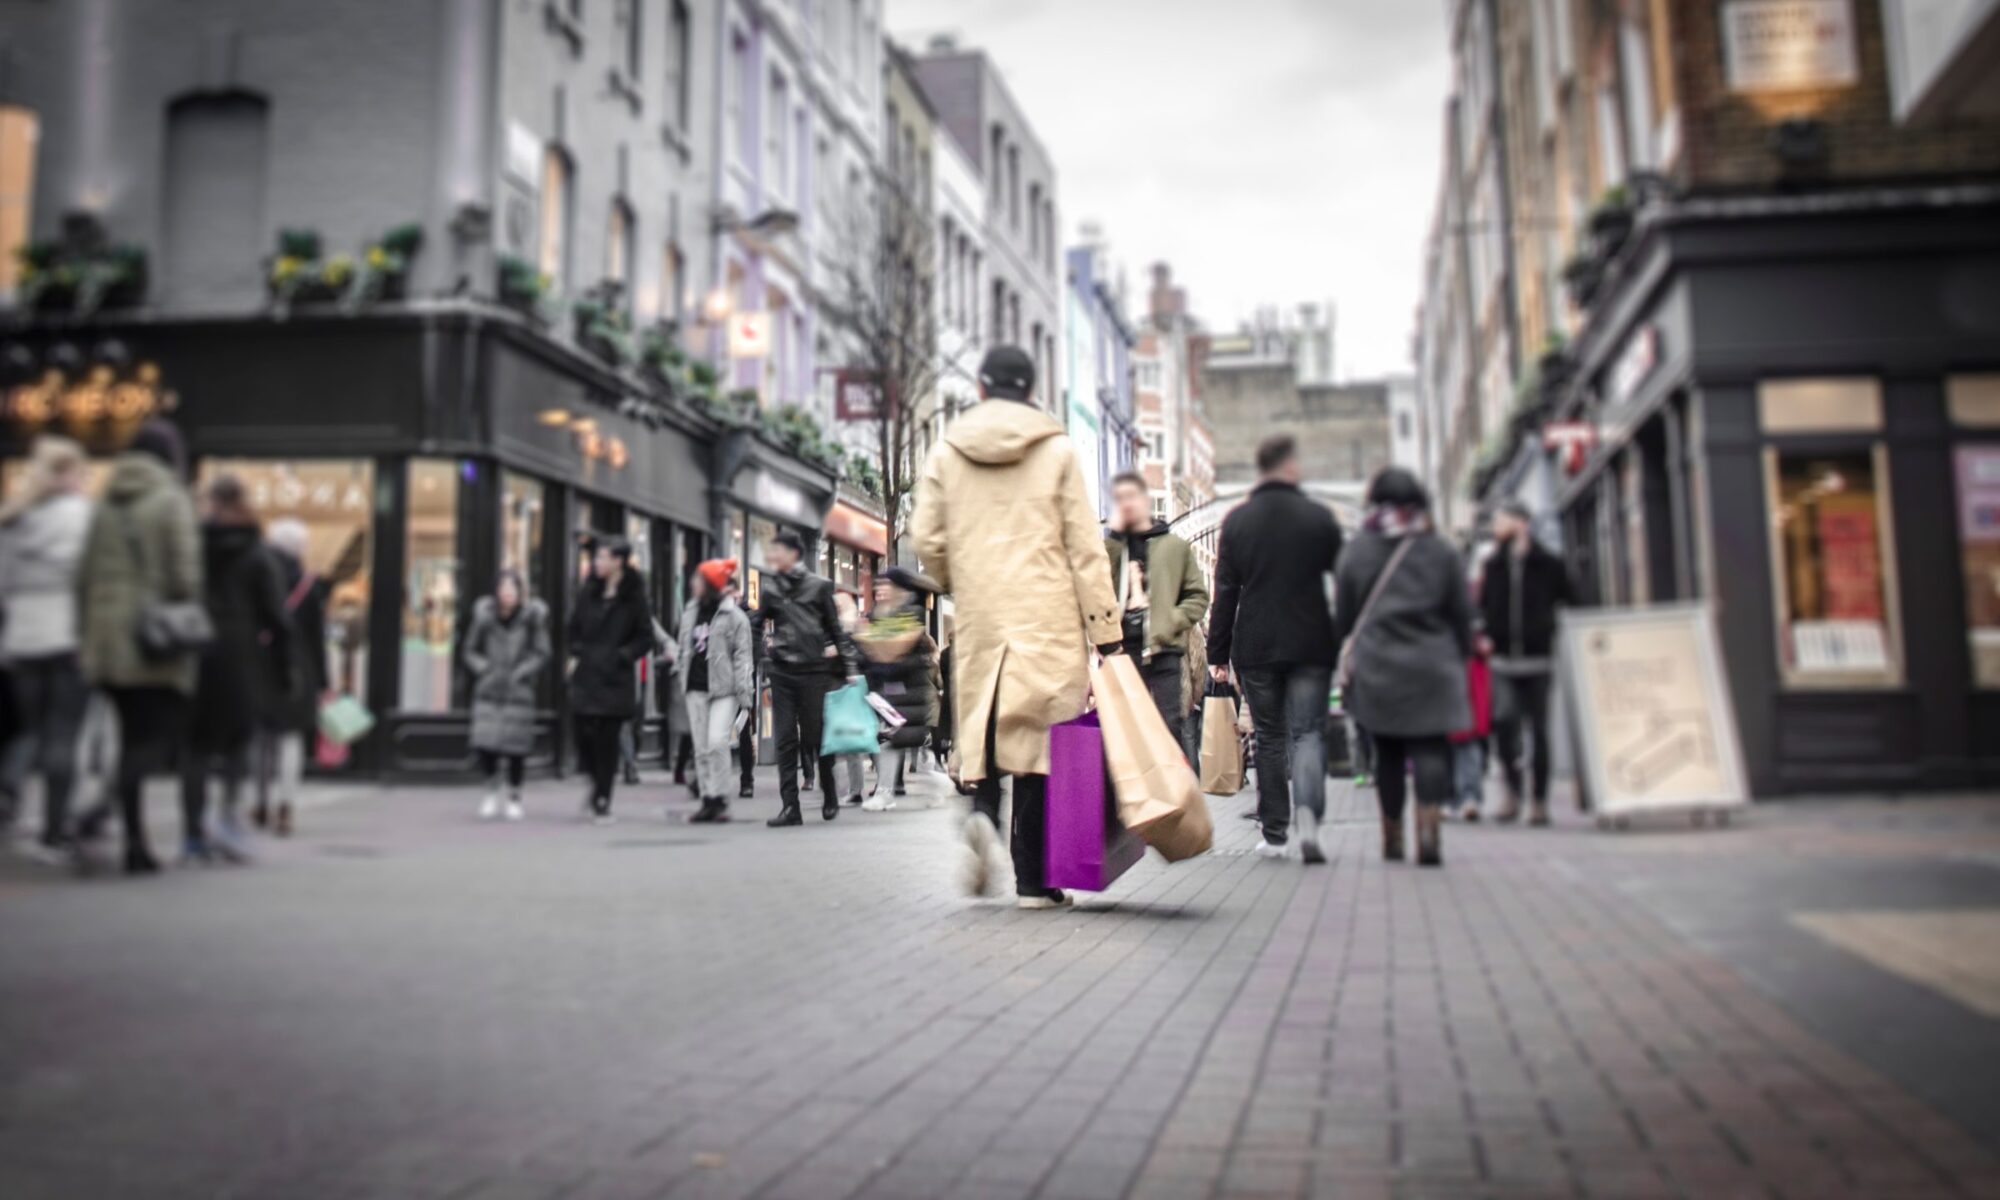 High street resurgence: 40% of ecommerce businesses in Europe plan to open a physical store